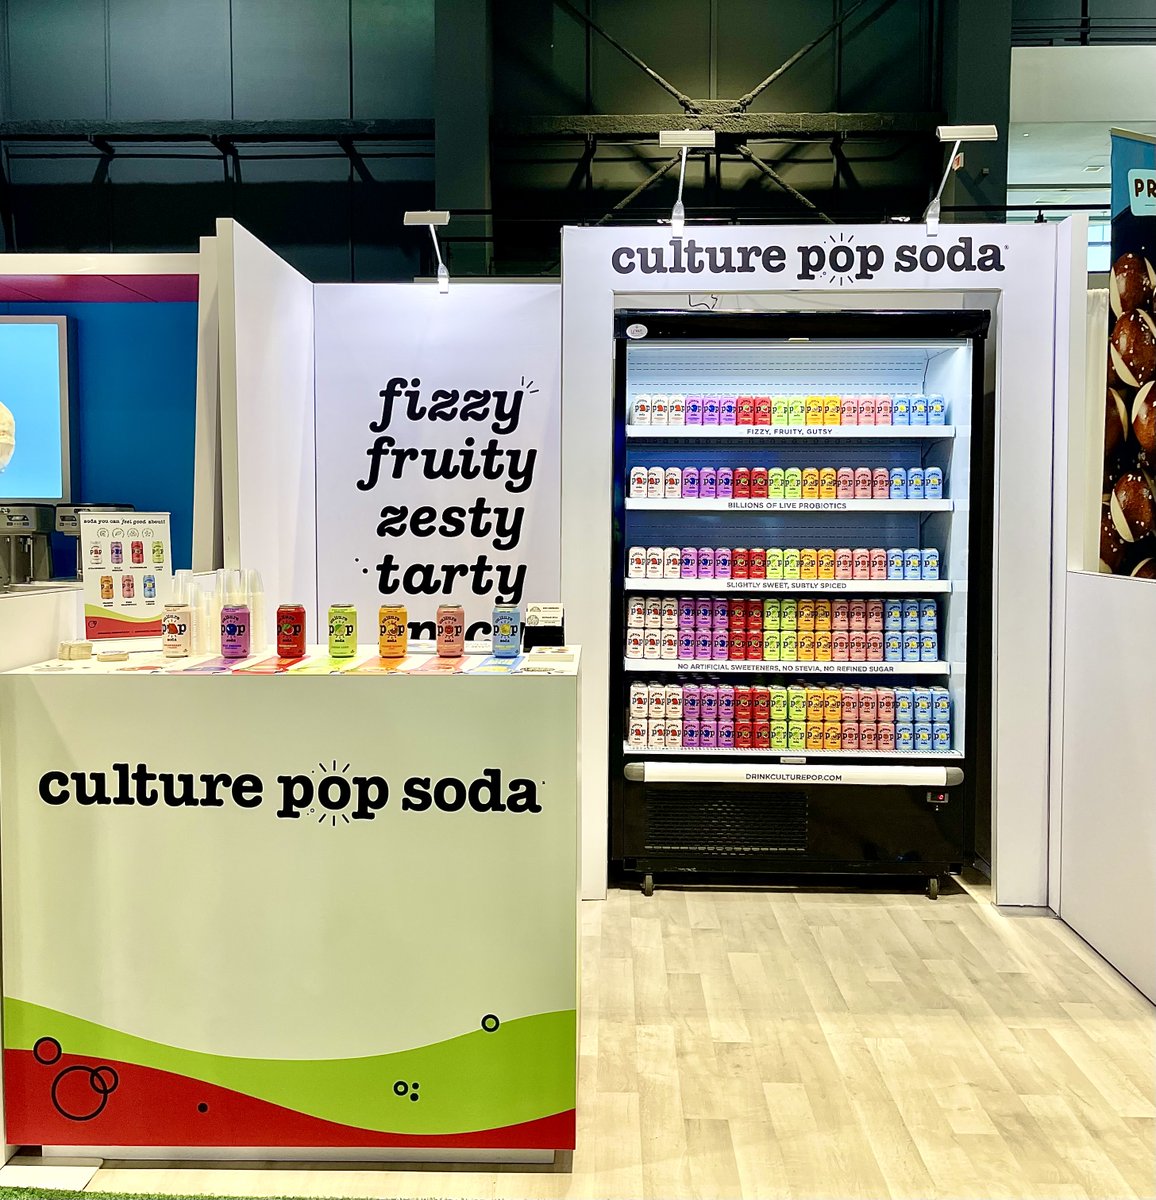 @drinkculturepop really stands out in a crowded trade show hall with this bright and bubbly 10x10 booth. The majority white finish makes their colorful branding really POP! #tradeshowlife #tradeshowexhibit #boothdesign #goodtimecreative #culturepop #nationalrestaurantshow